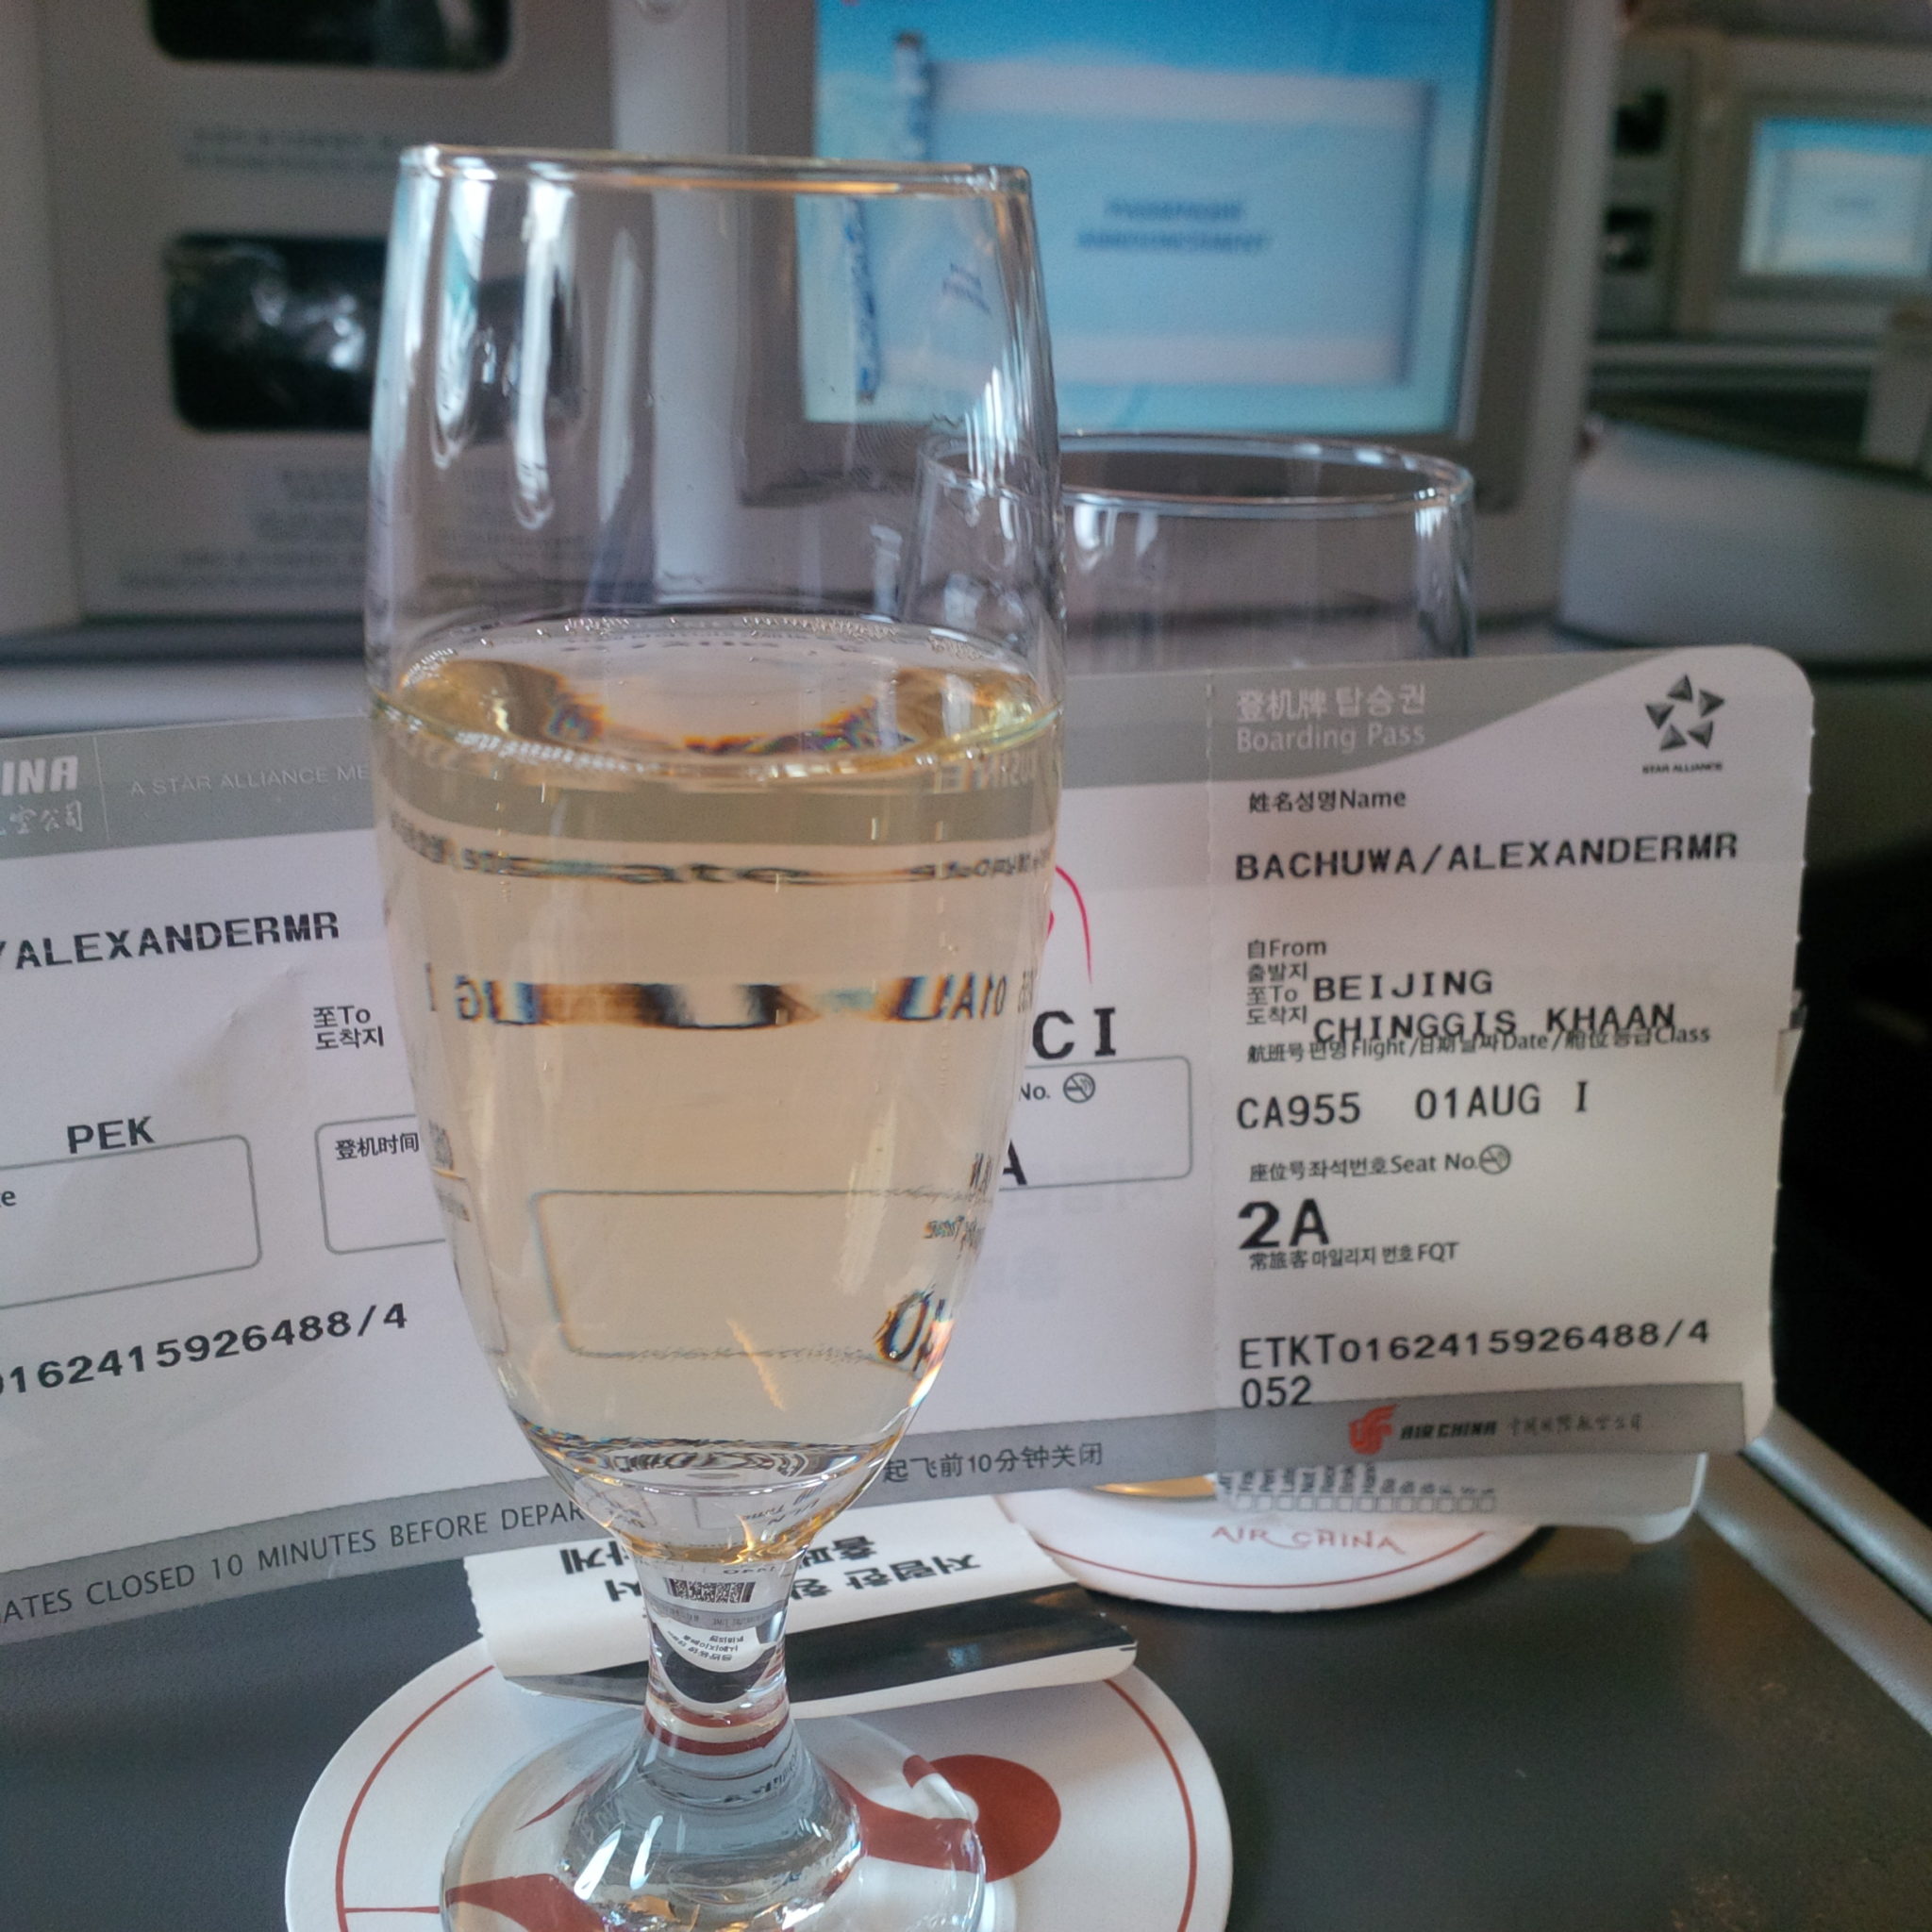 a glass of champagne next to a ticket